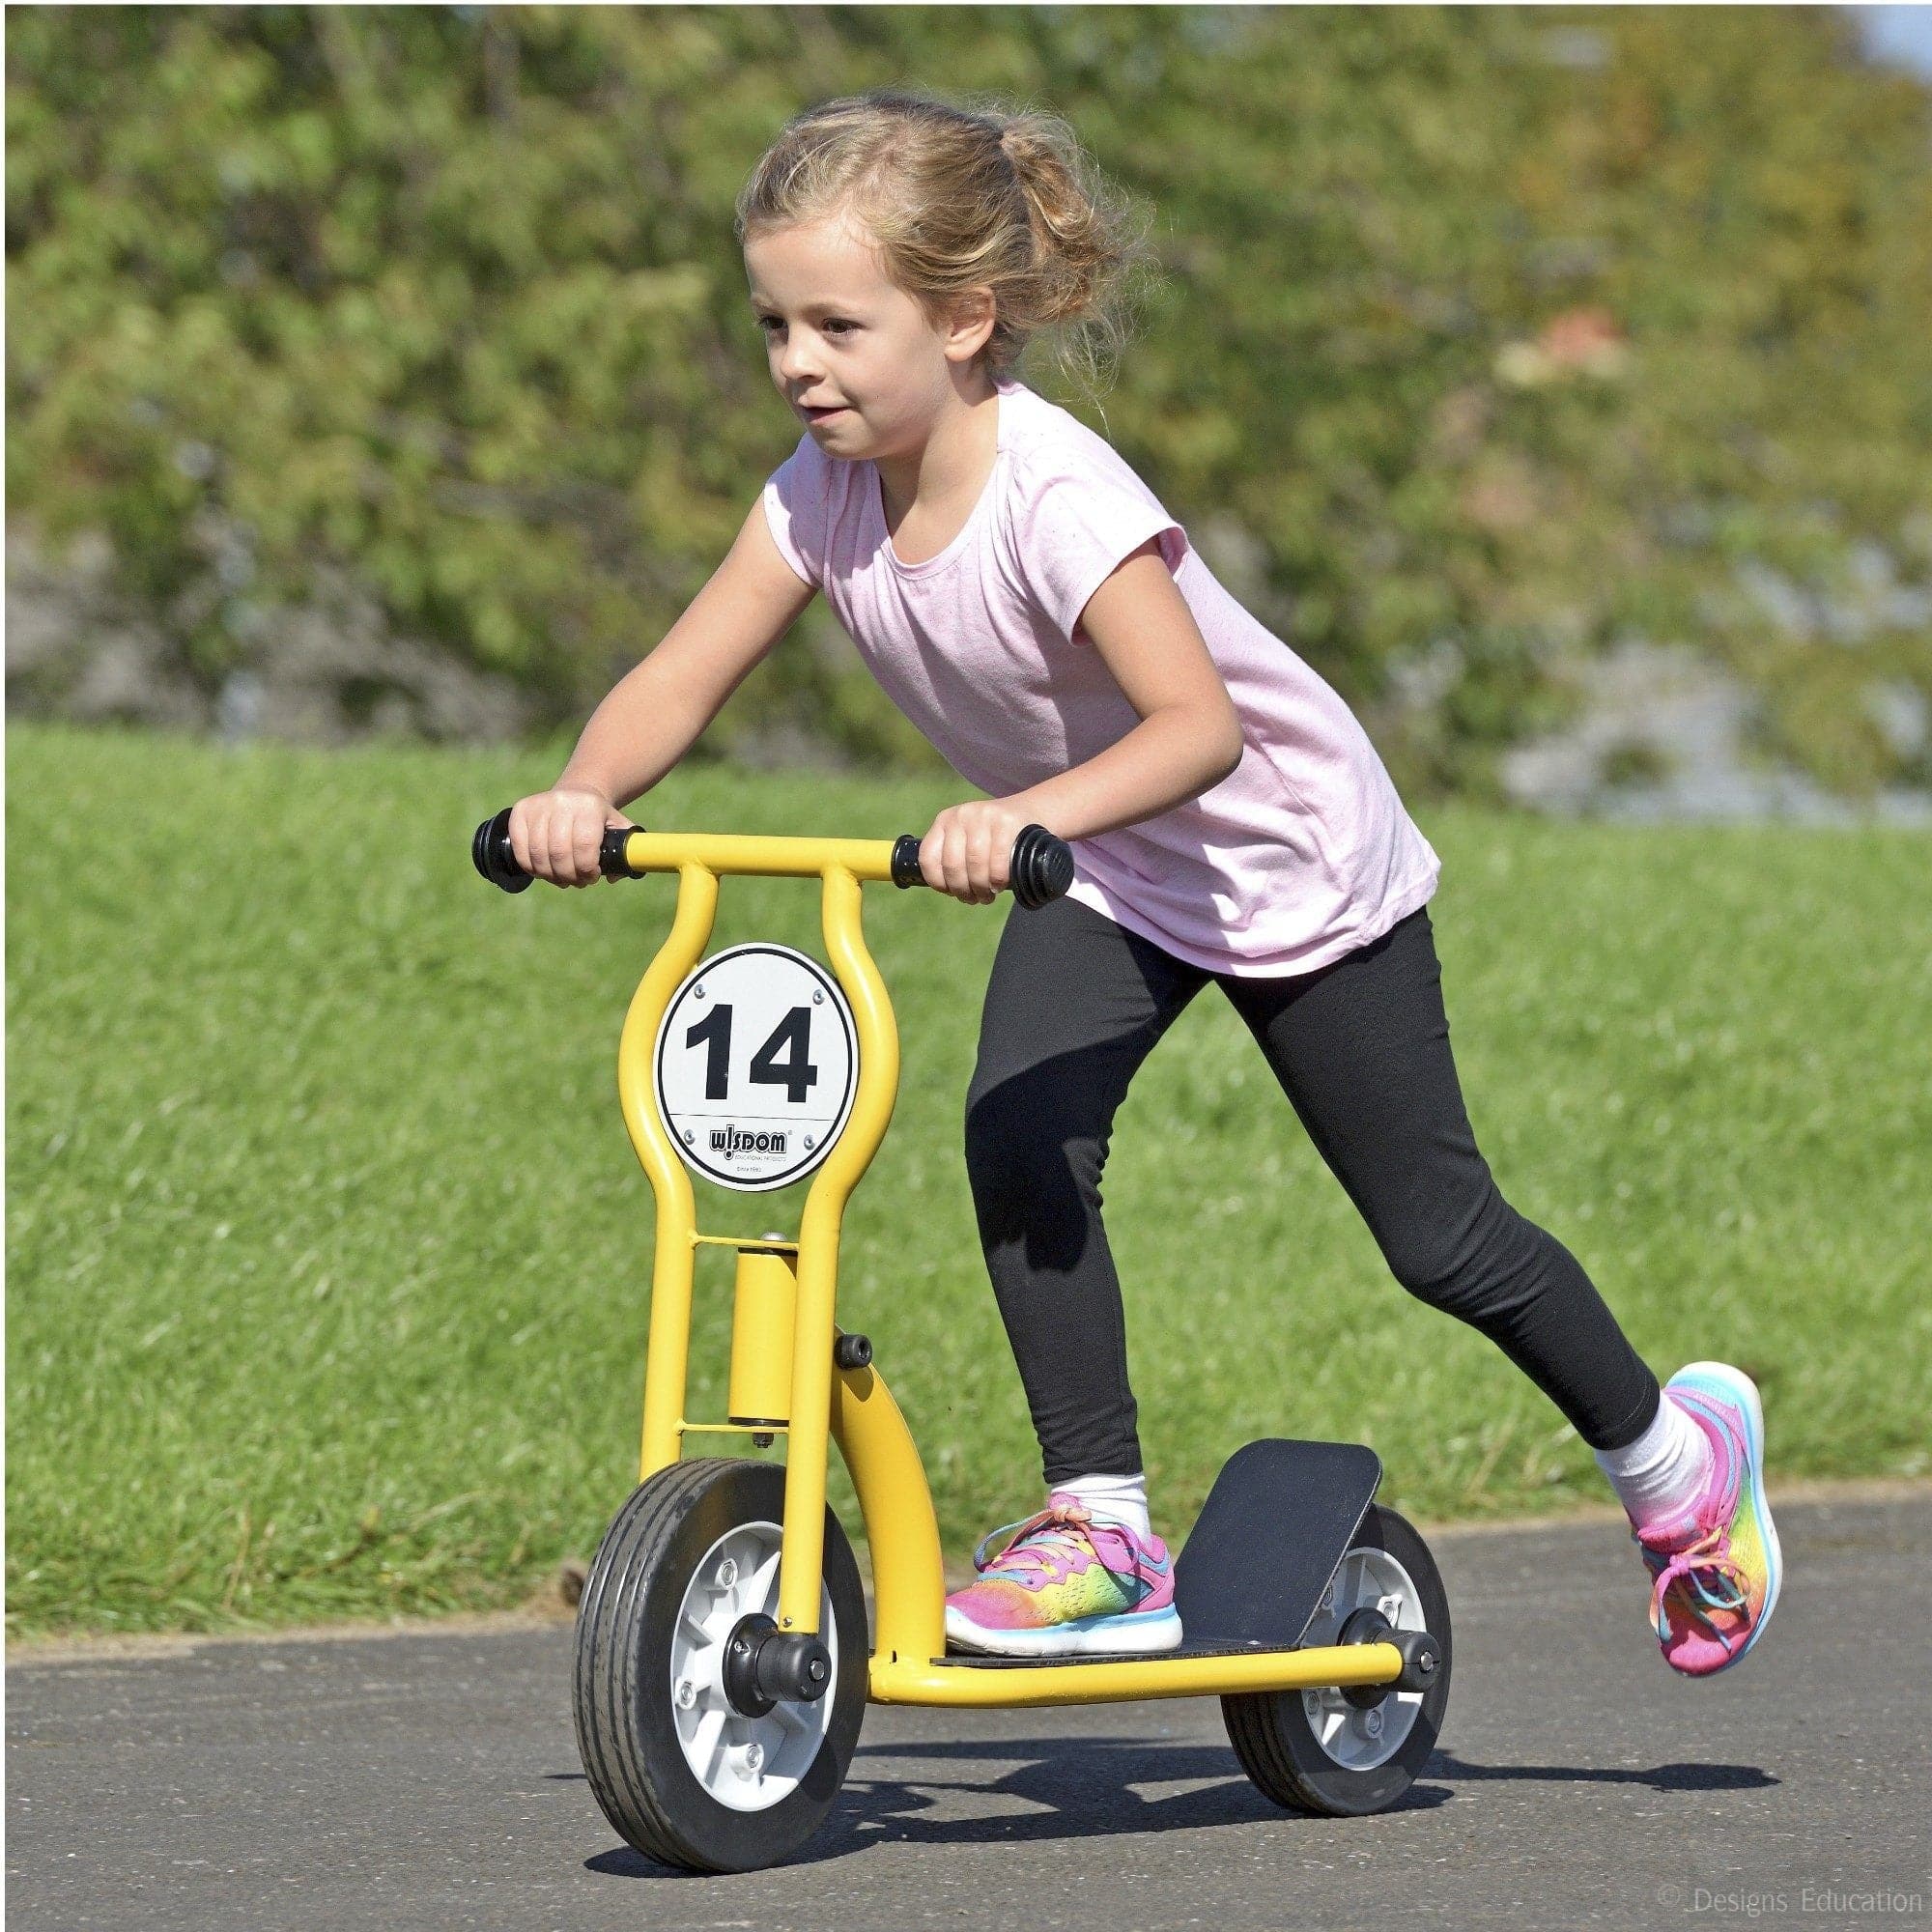 Wisdom Scooter, The Wisdom Scooter is designed to build upon children’s early balancing development whilst still maintaining stability. The Wisdom Scooter features wheels which are made of durable polypropylene with solid rubber puncture proof tyres. The Wisdom Scooter is a classic children's scooter that has been in early years and school playgrounds for many years as a staple product.The Wisdom Scooter is suitable for children aged 3-4 years and is an easy to use durable scooter.The Wisdom scooter comes w